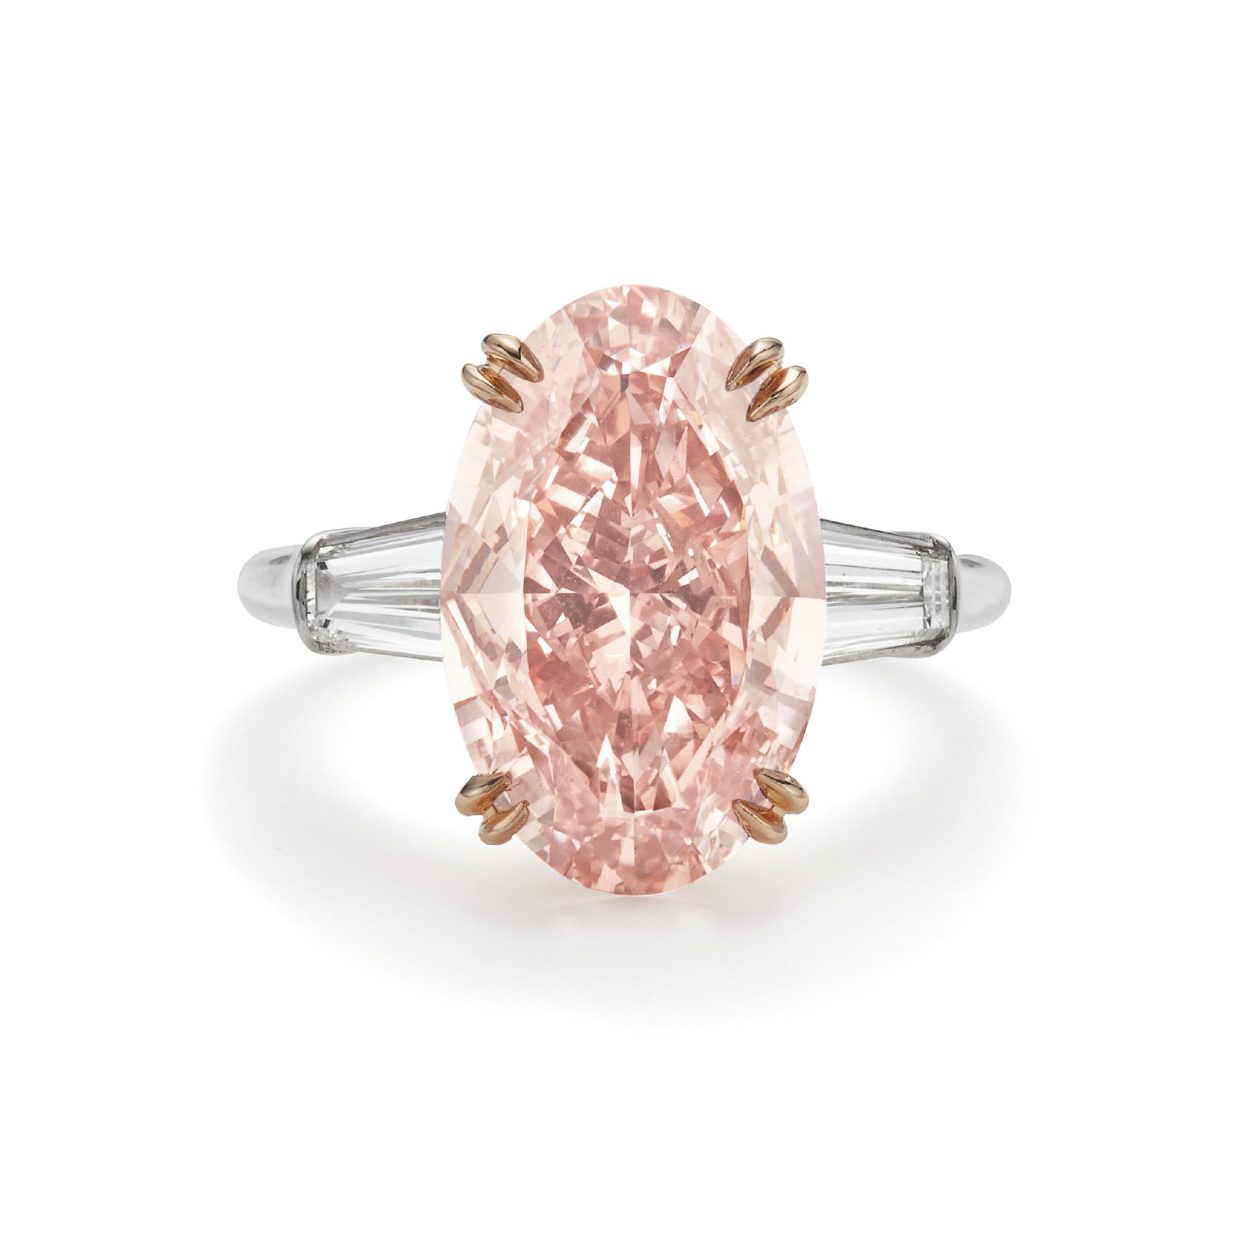 Phillips Will End Its First Half Of The Year With Its Own “Impressive” Pink Diamond